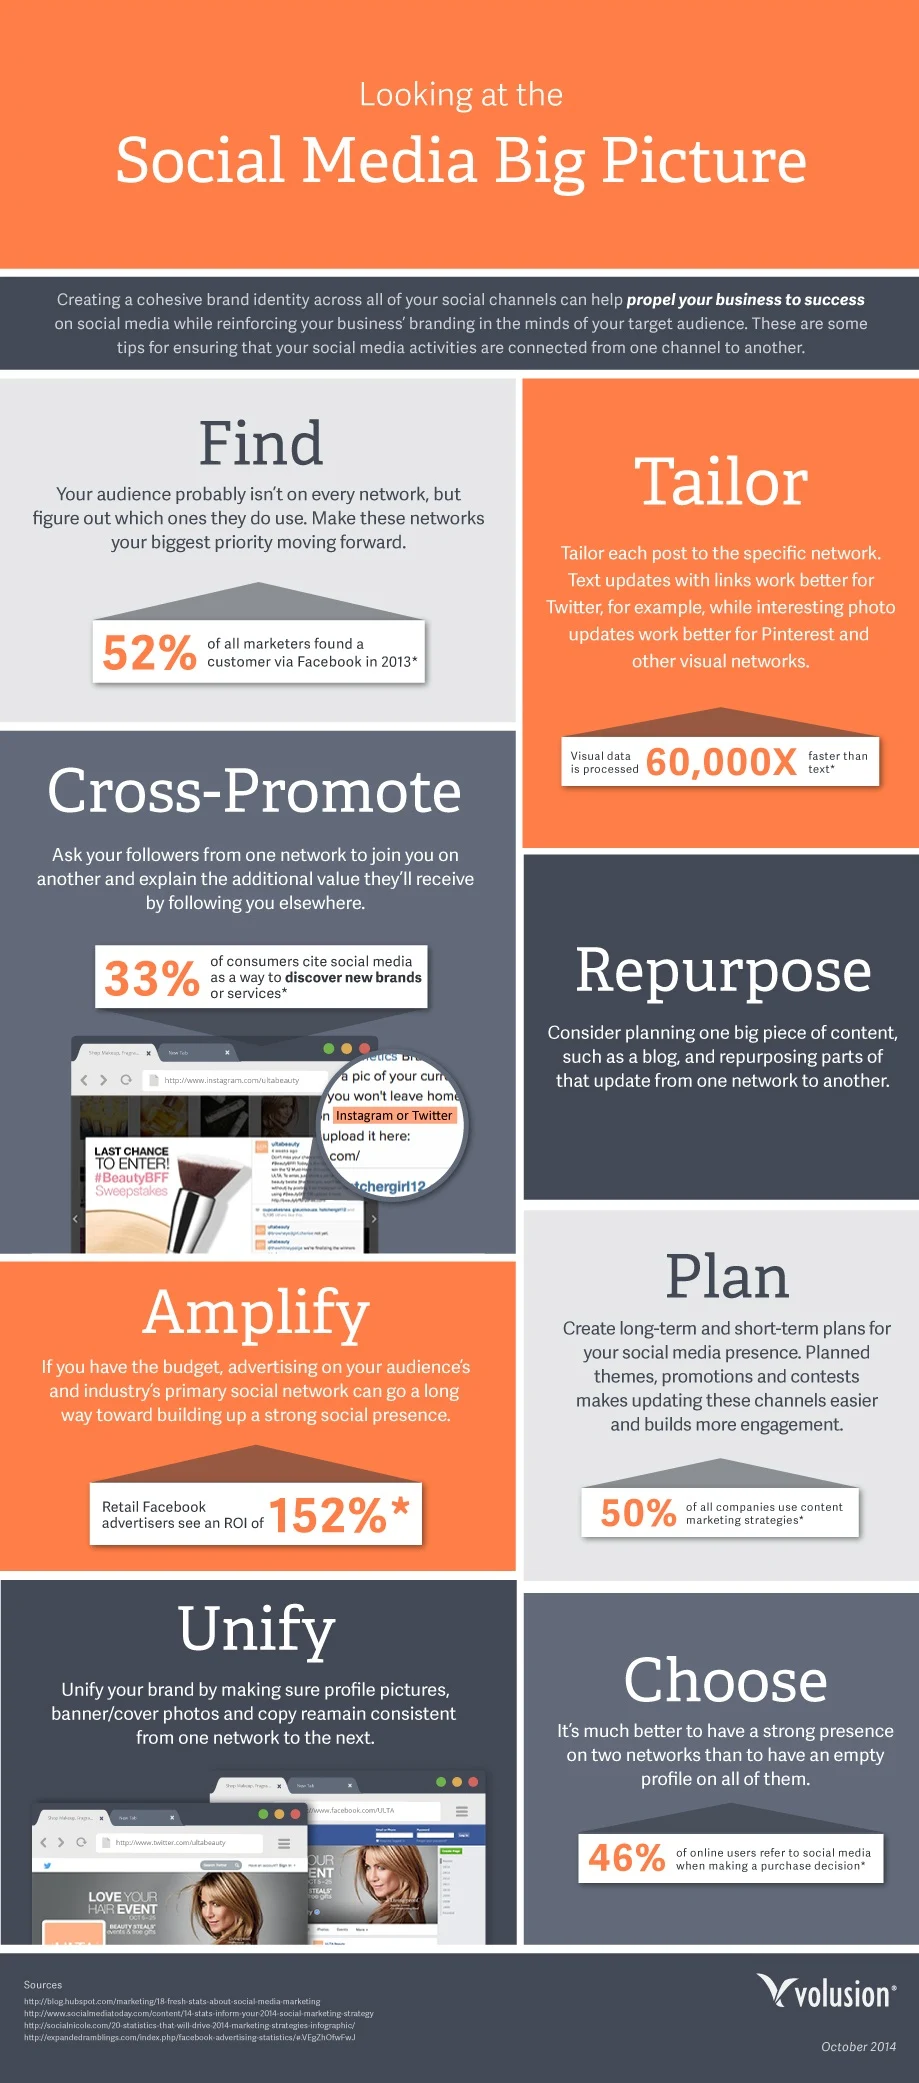 Cultivate Your Audience and Drive Engagement on #SocialMedia - #Infographic